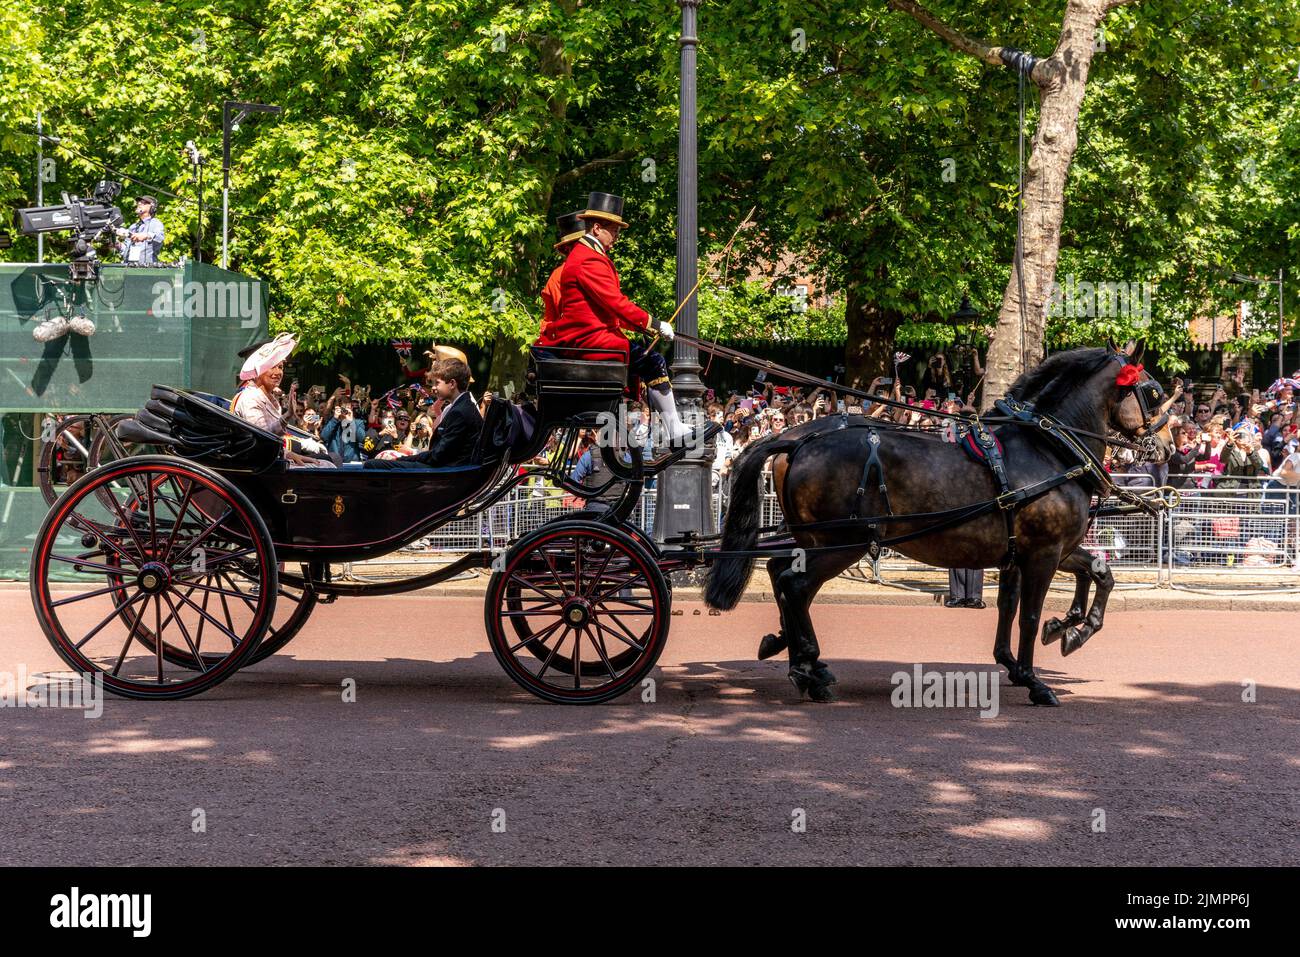 Members Of The British Royal Family On Their Way to The Trooping The Colour Ceremony, The Mall, London, UK. Stock Photo